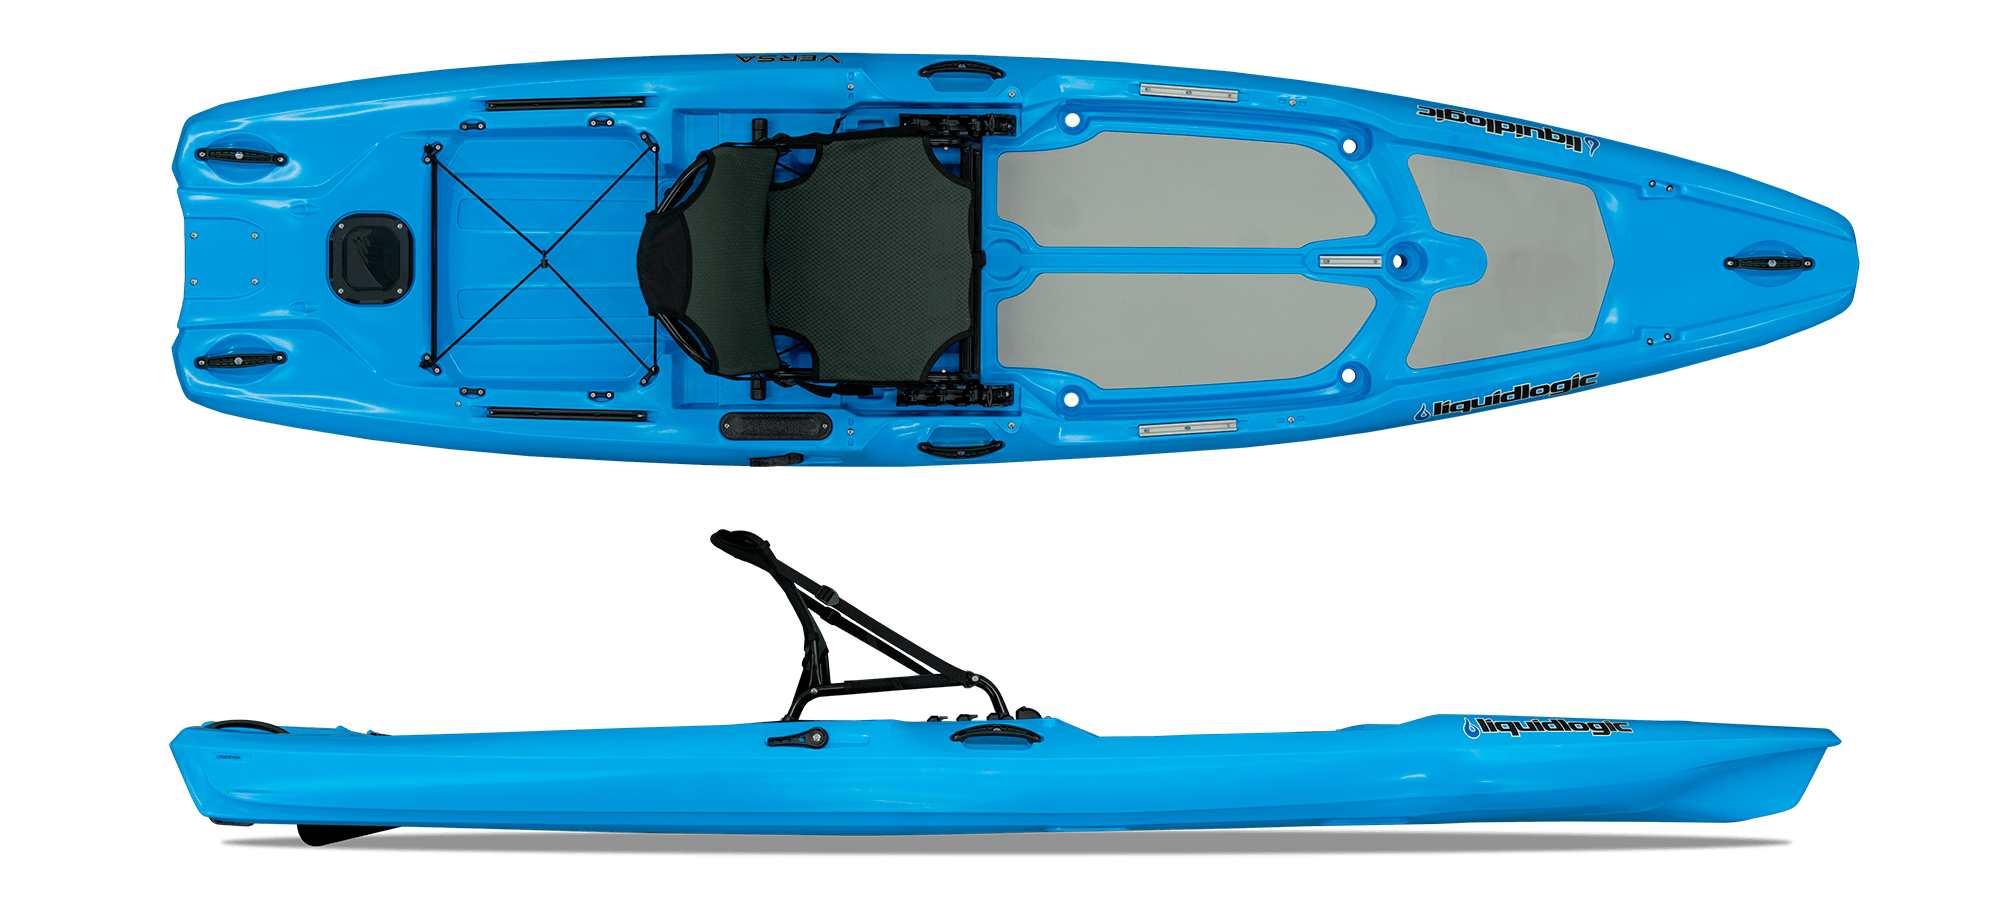 Exciting double seater kayak For Thrill And Adventure 